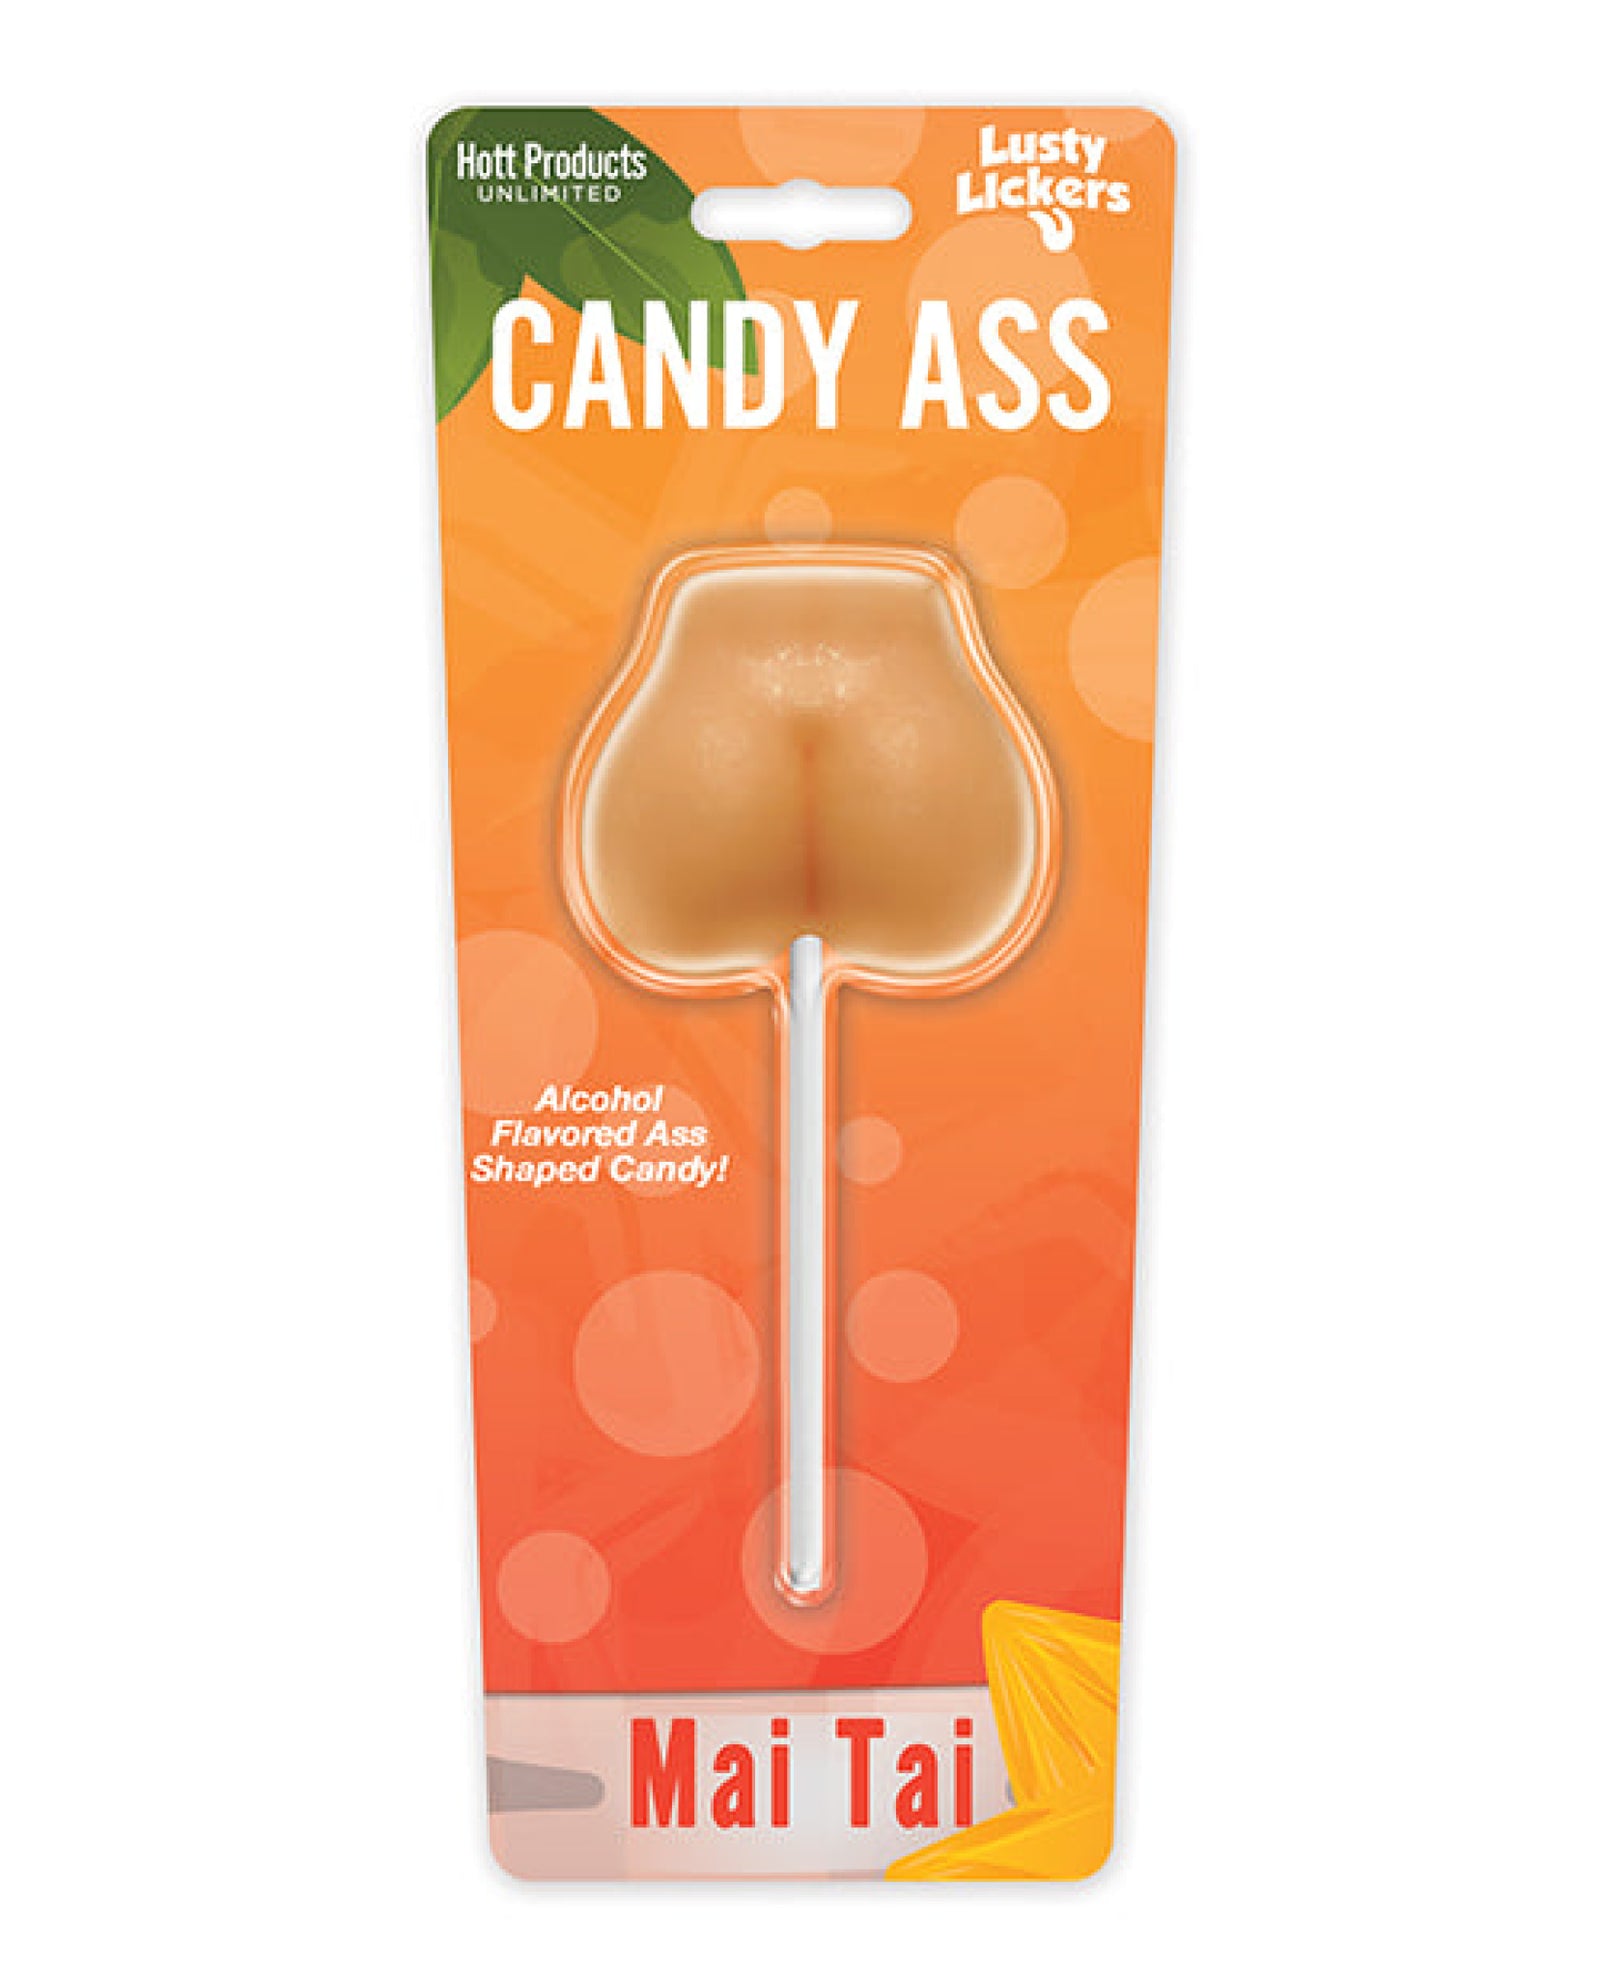 Candy Ass Booty Pops Hott Products